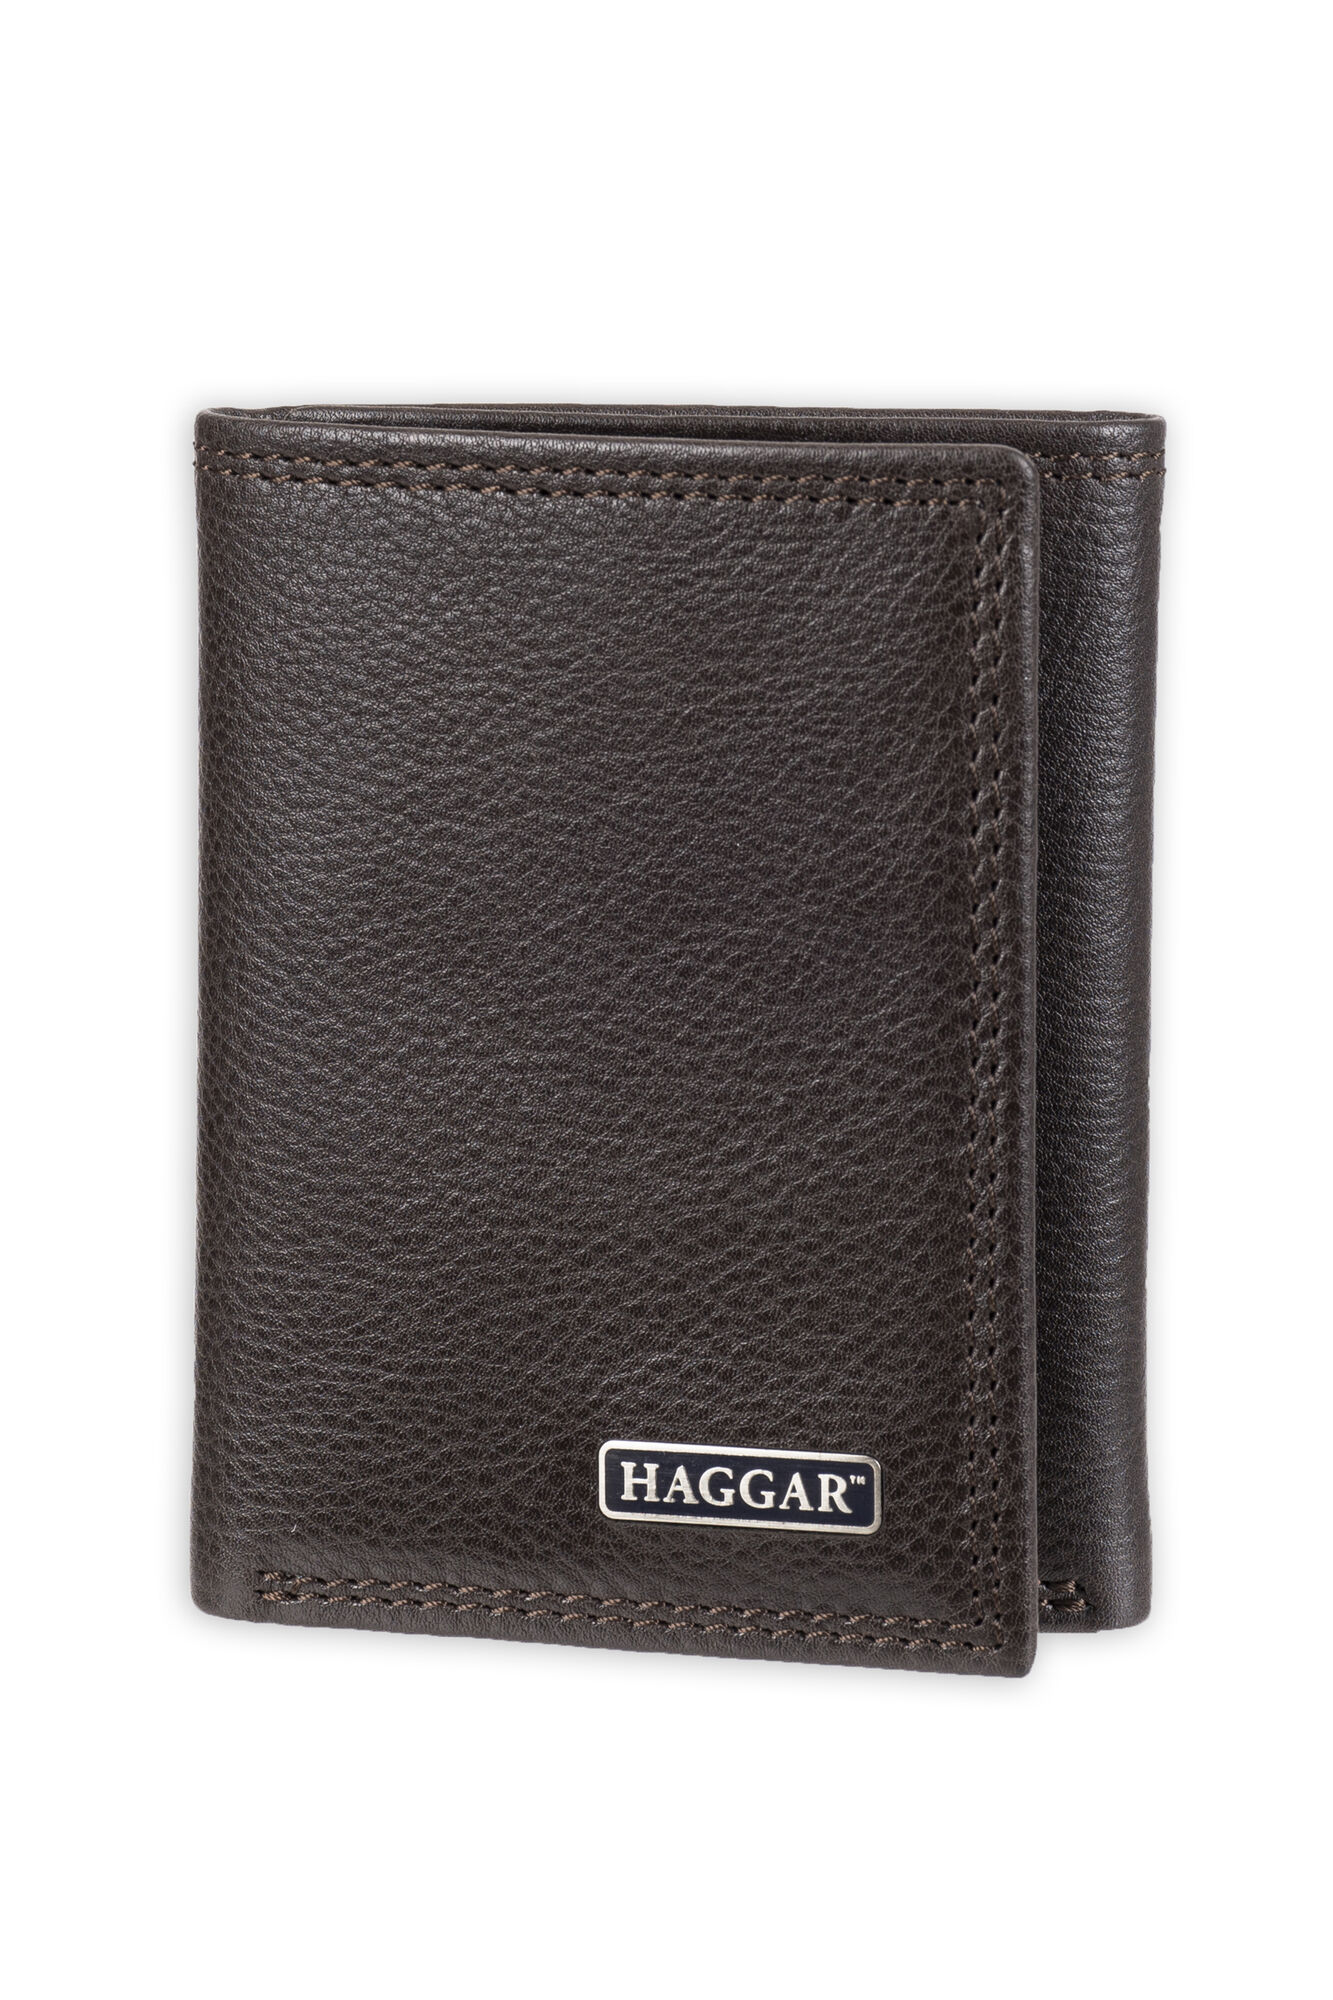 Haggar Rfid Atwood Trifold Wallet Brown (31HH110001) photo